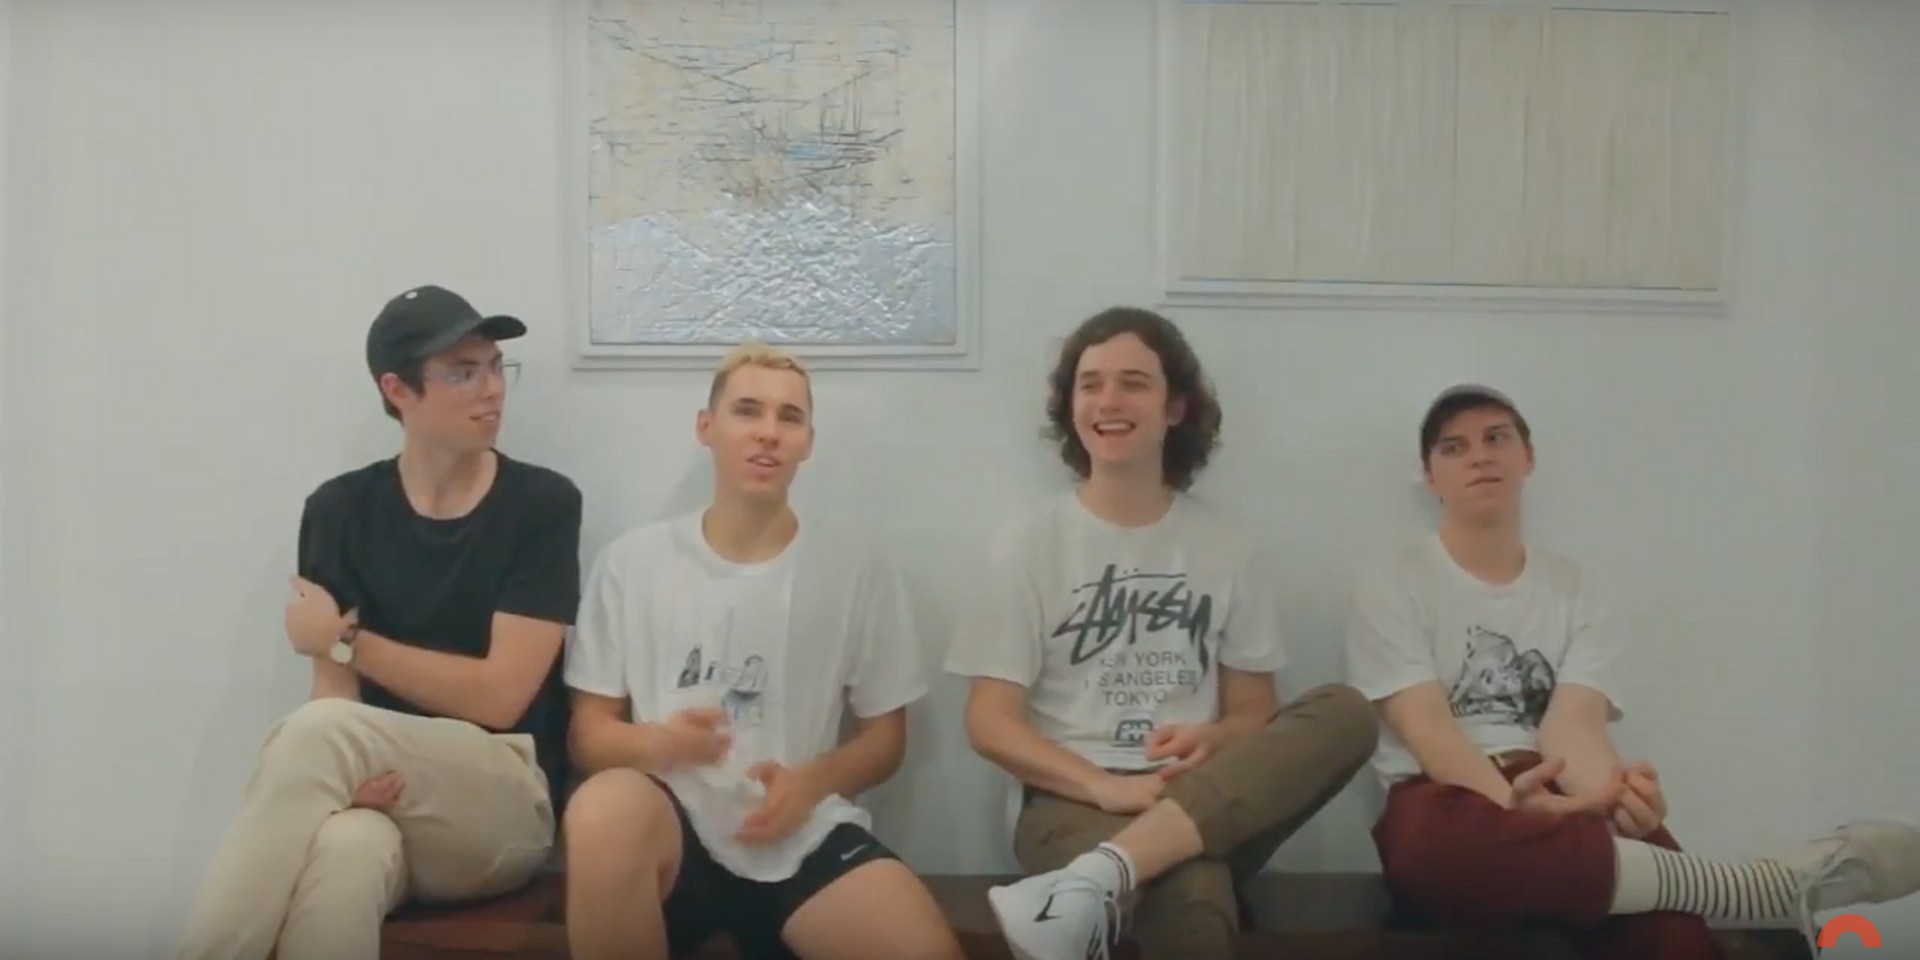 WATCH: BADBADNOTGOOD discuss kimojis, airports, Coldplay and their reaction to music from Southeast Asia